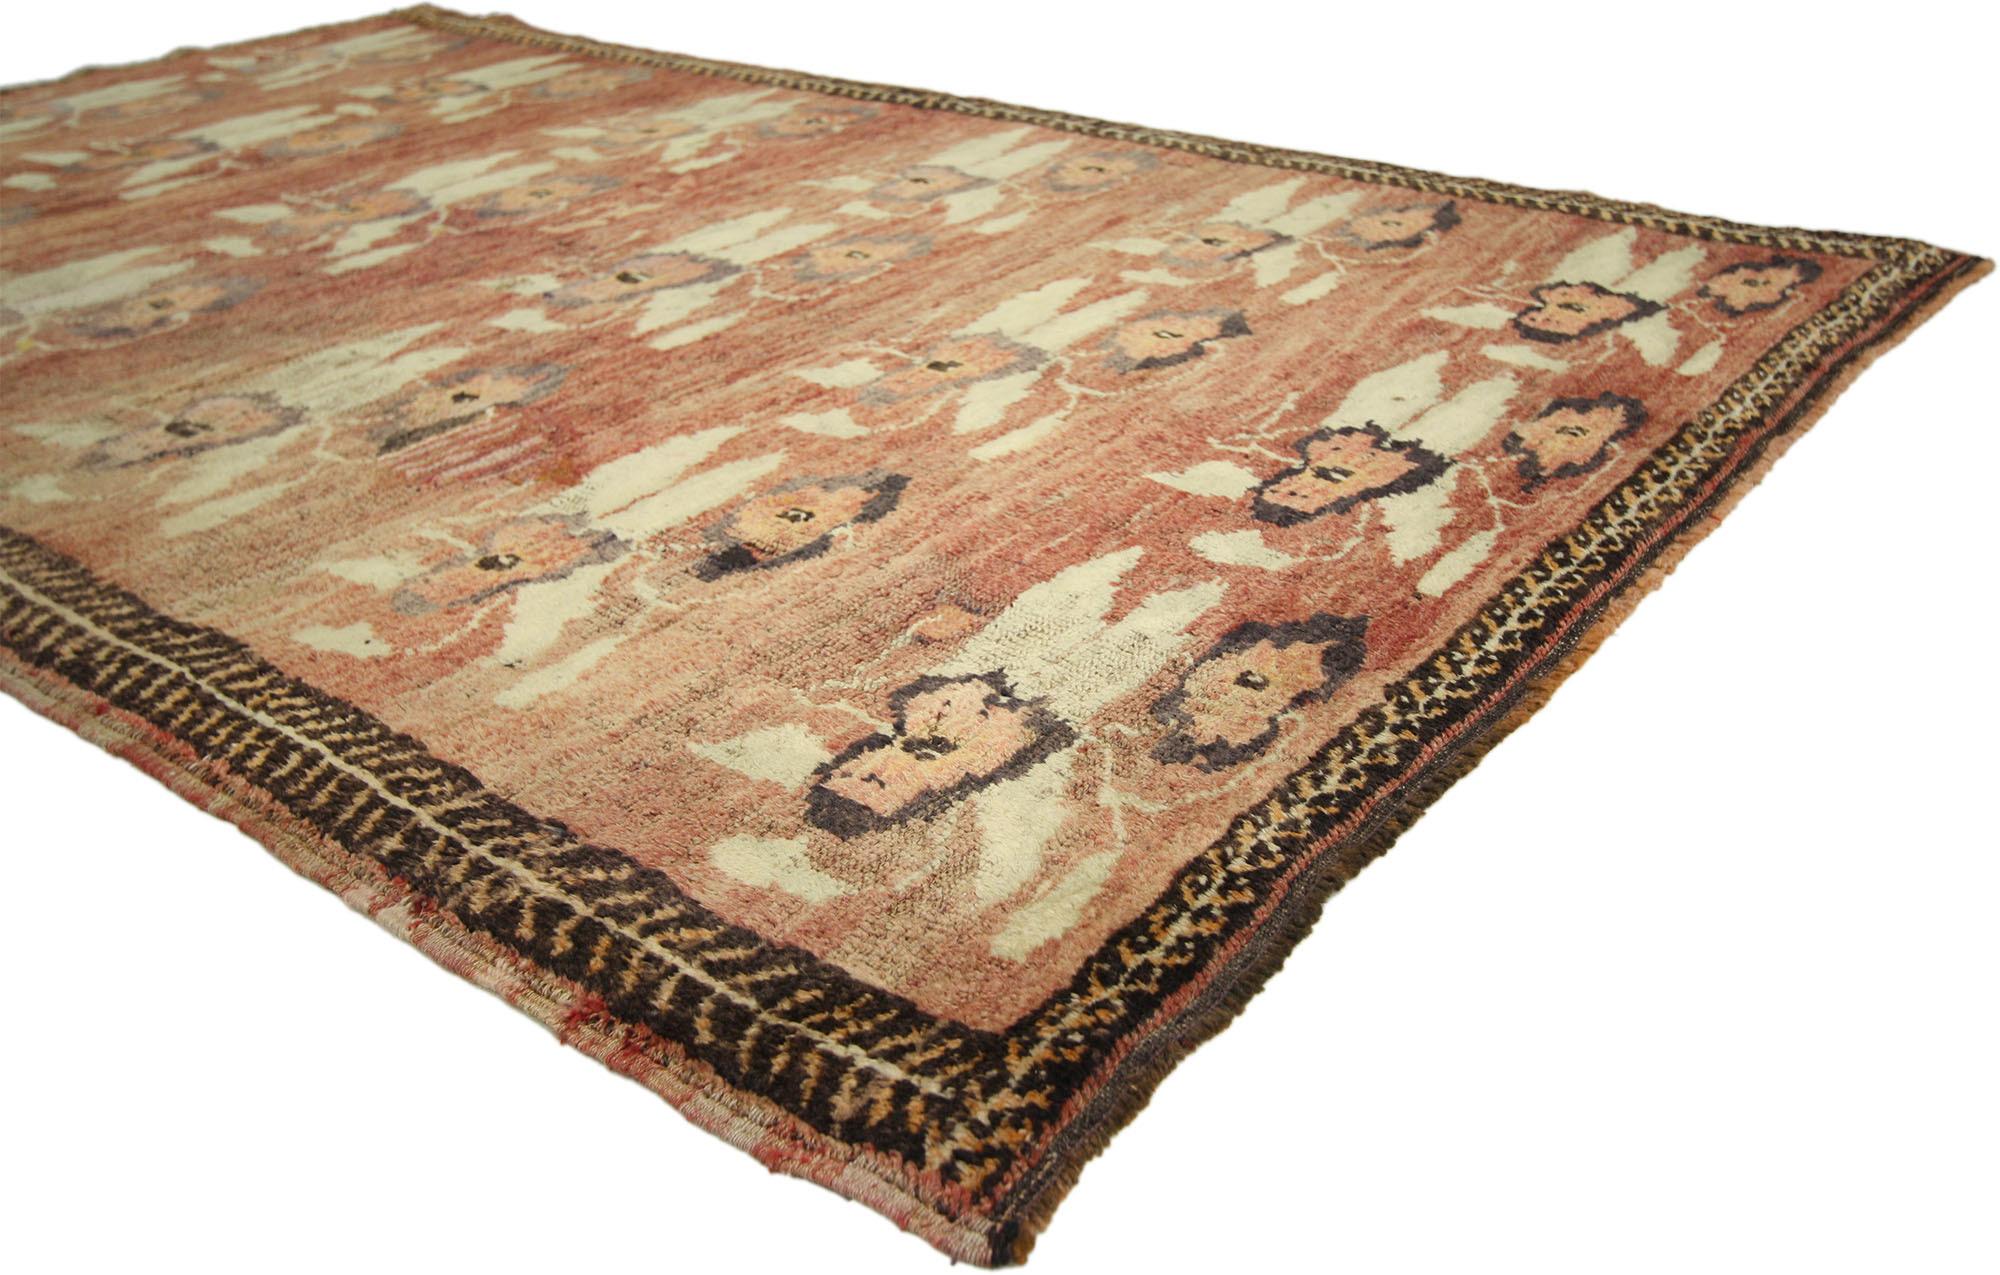 50293 Vintage Turkish Oushak Rug, 04'03 X 06'08. 
Warm and inviting with romantic connotations, this hand knotted wool vintage Turkish Oushak rug is a captivating vision of woven beauty. The floral pattern and rustic earth-tone colors woven into